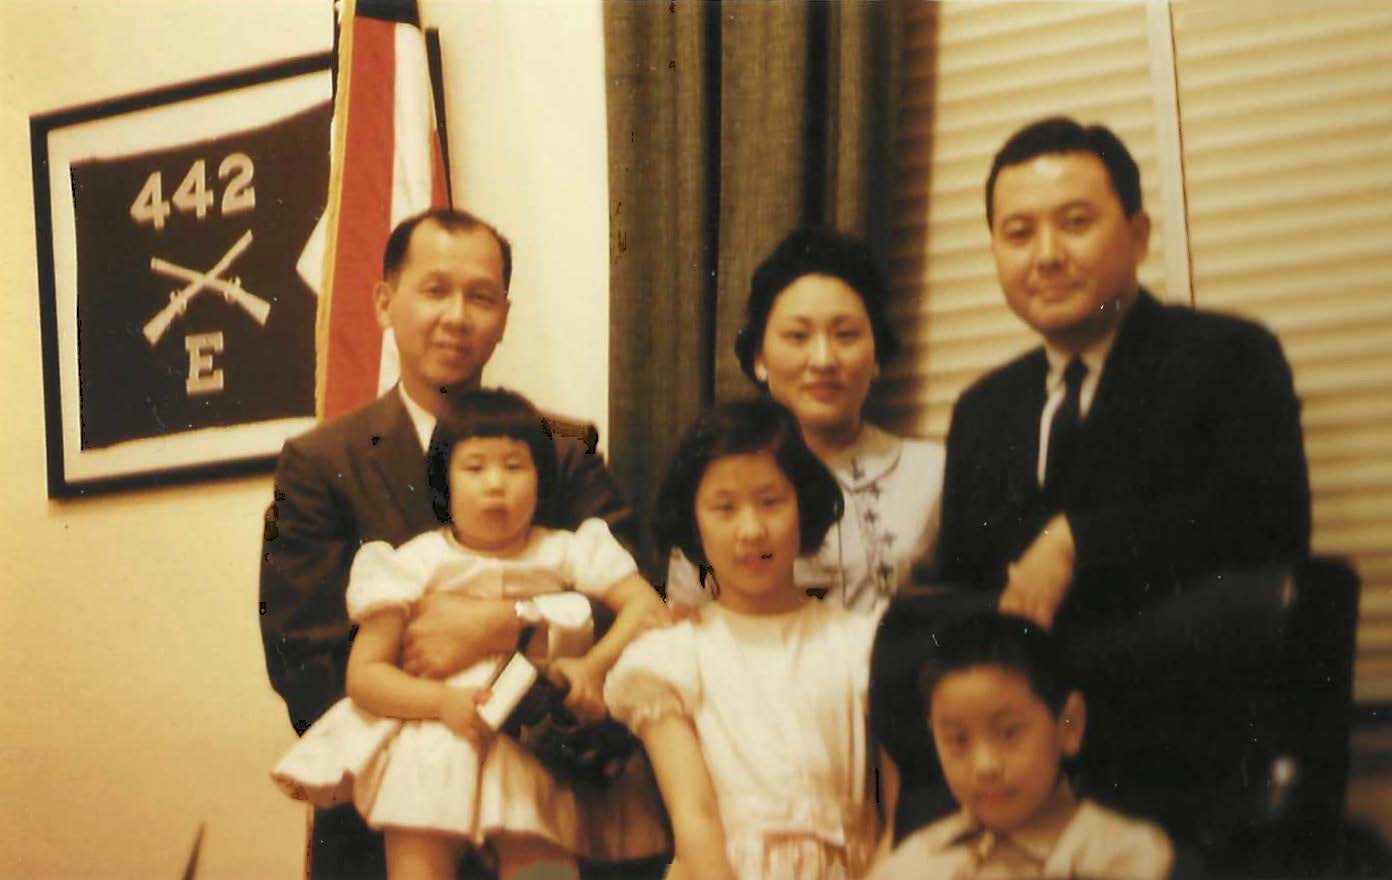 Carol as a child with her family and the late Sen. Daniel Inouye.